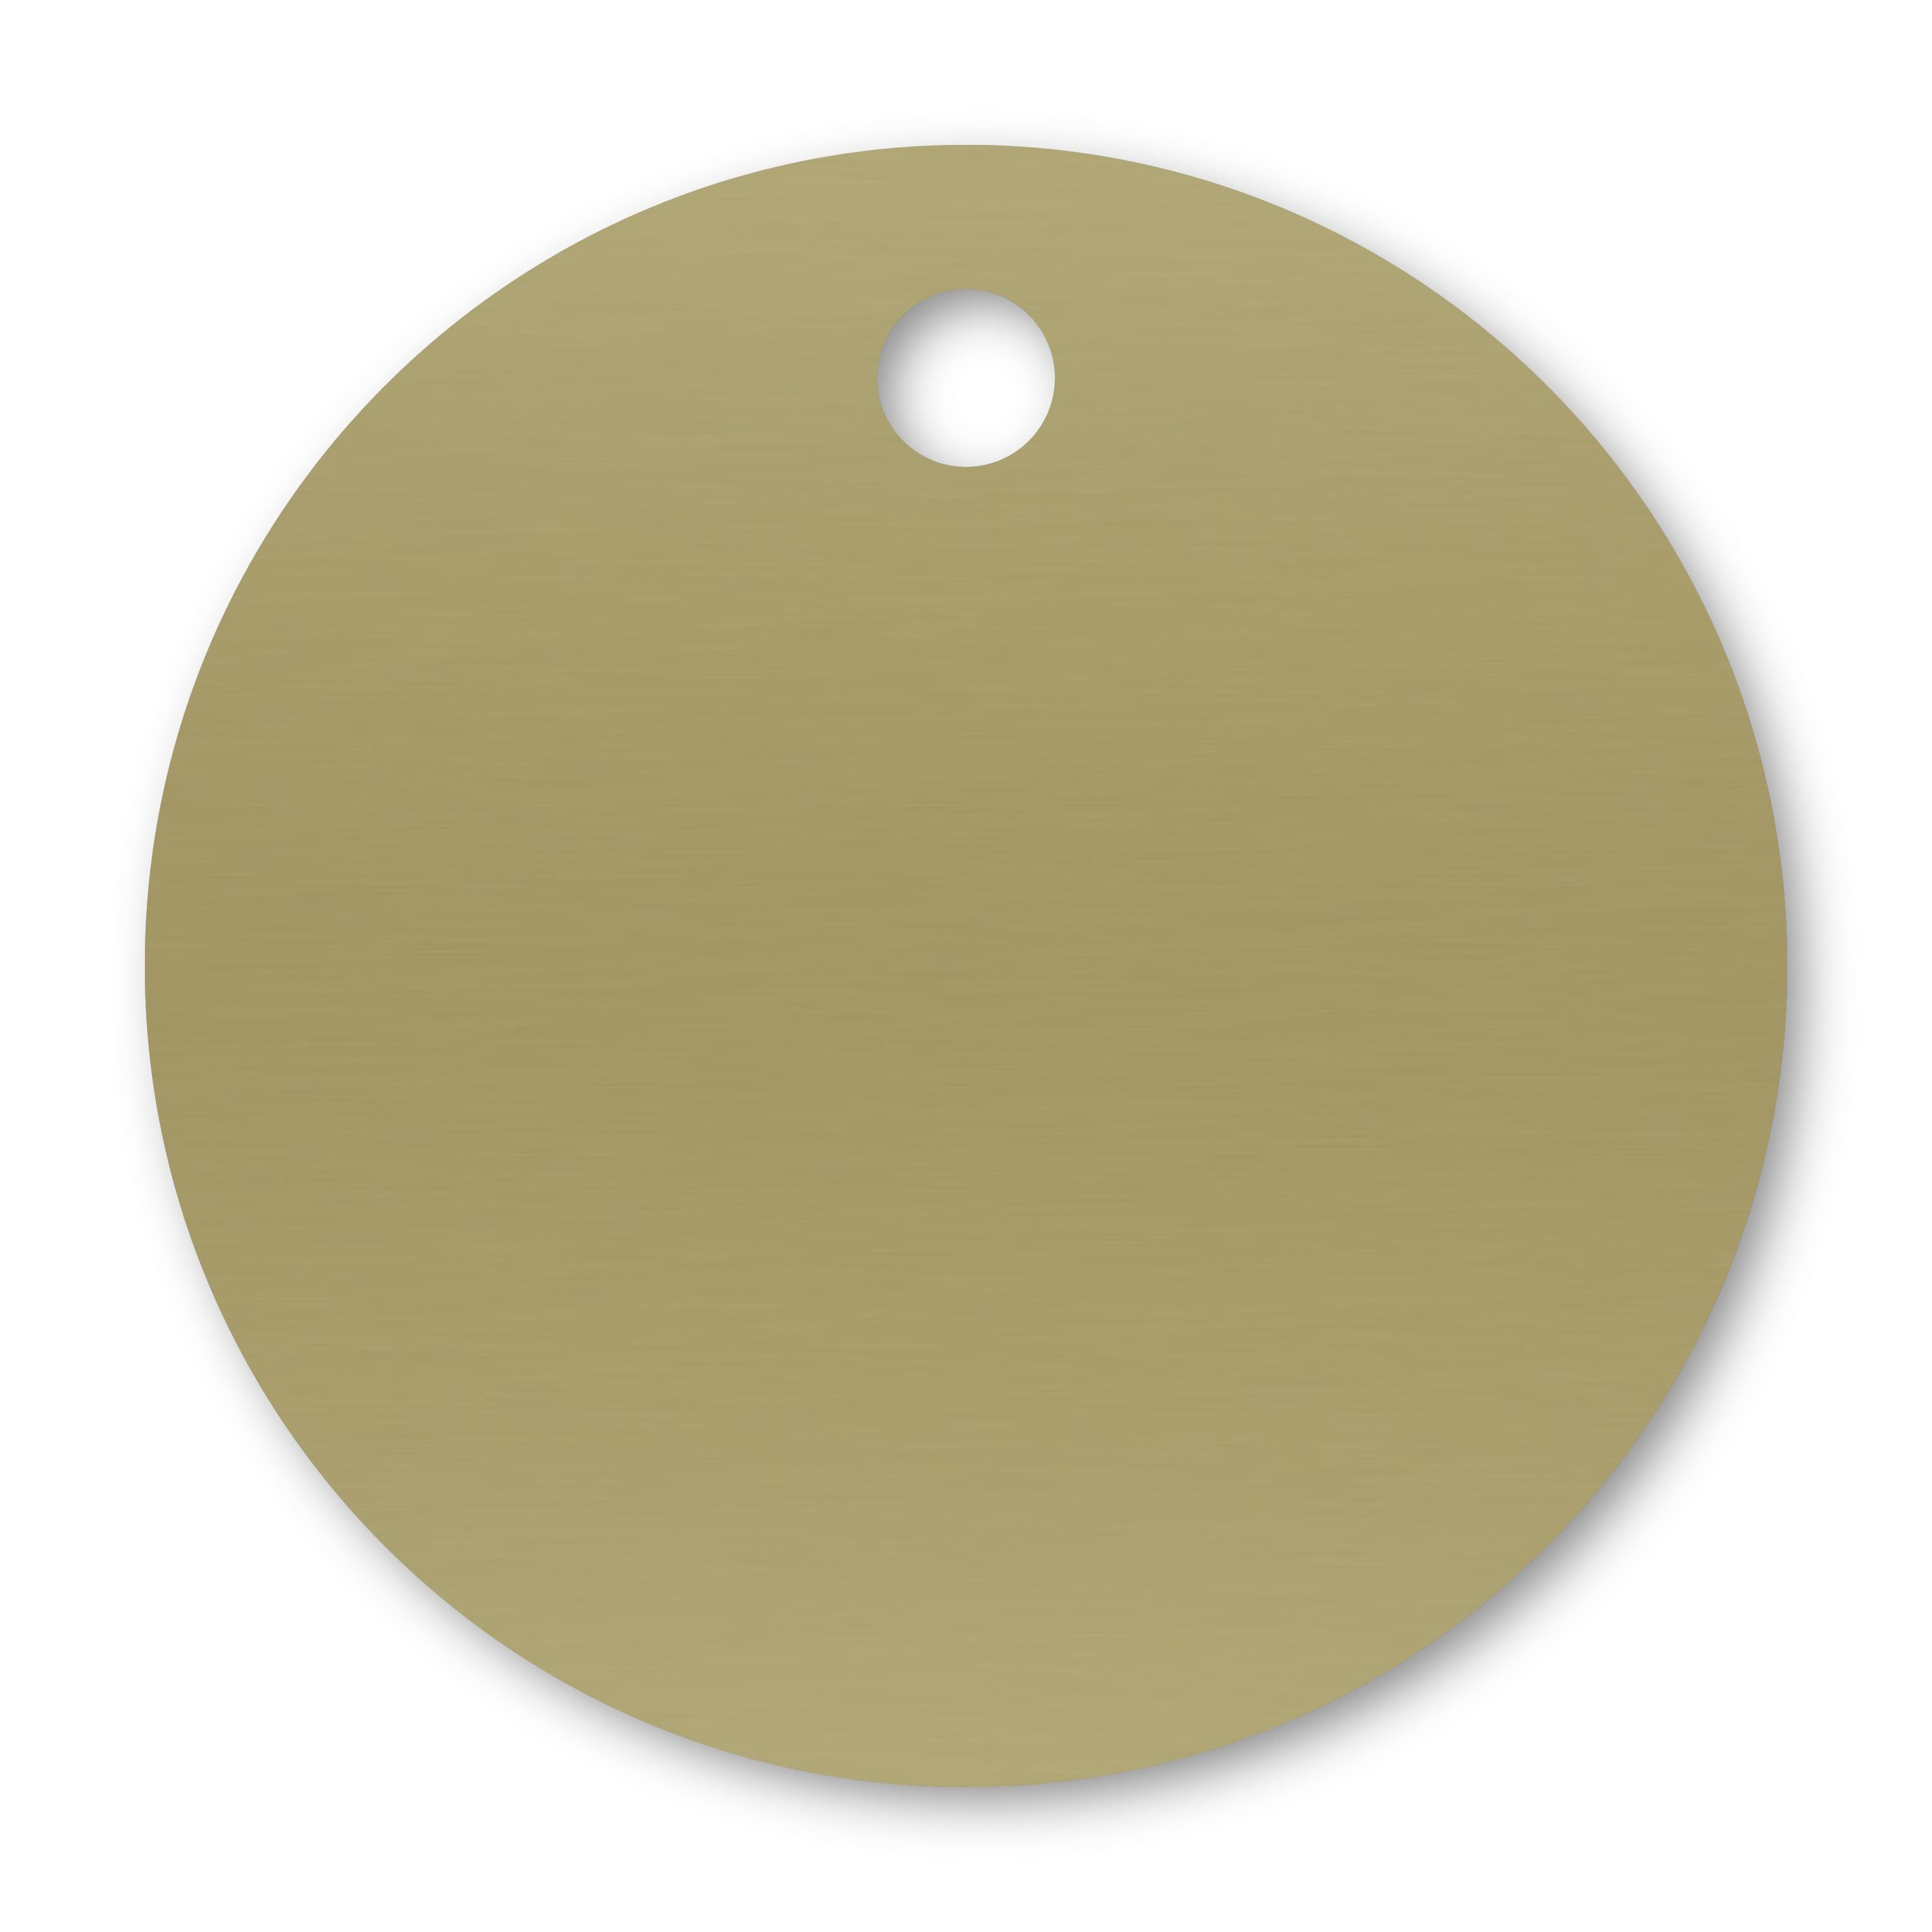 Anodized Aluminum Round Tags, 1" with 1/8" Hole, Laser Engraved Metal Tags Craftworks NW Gold 